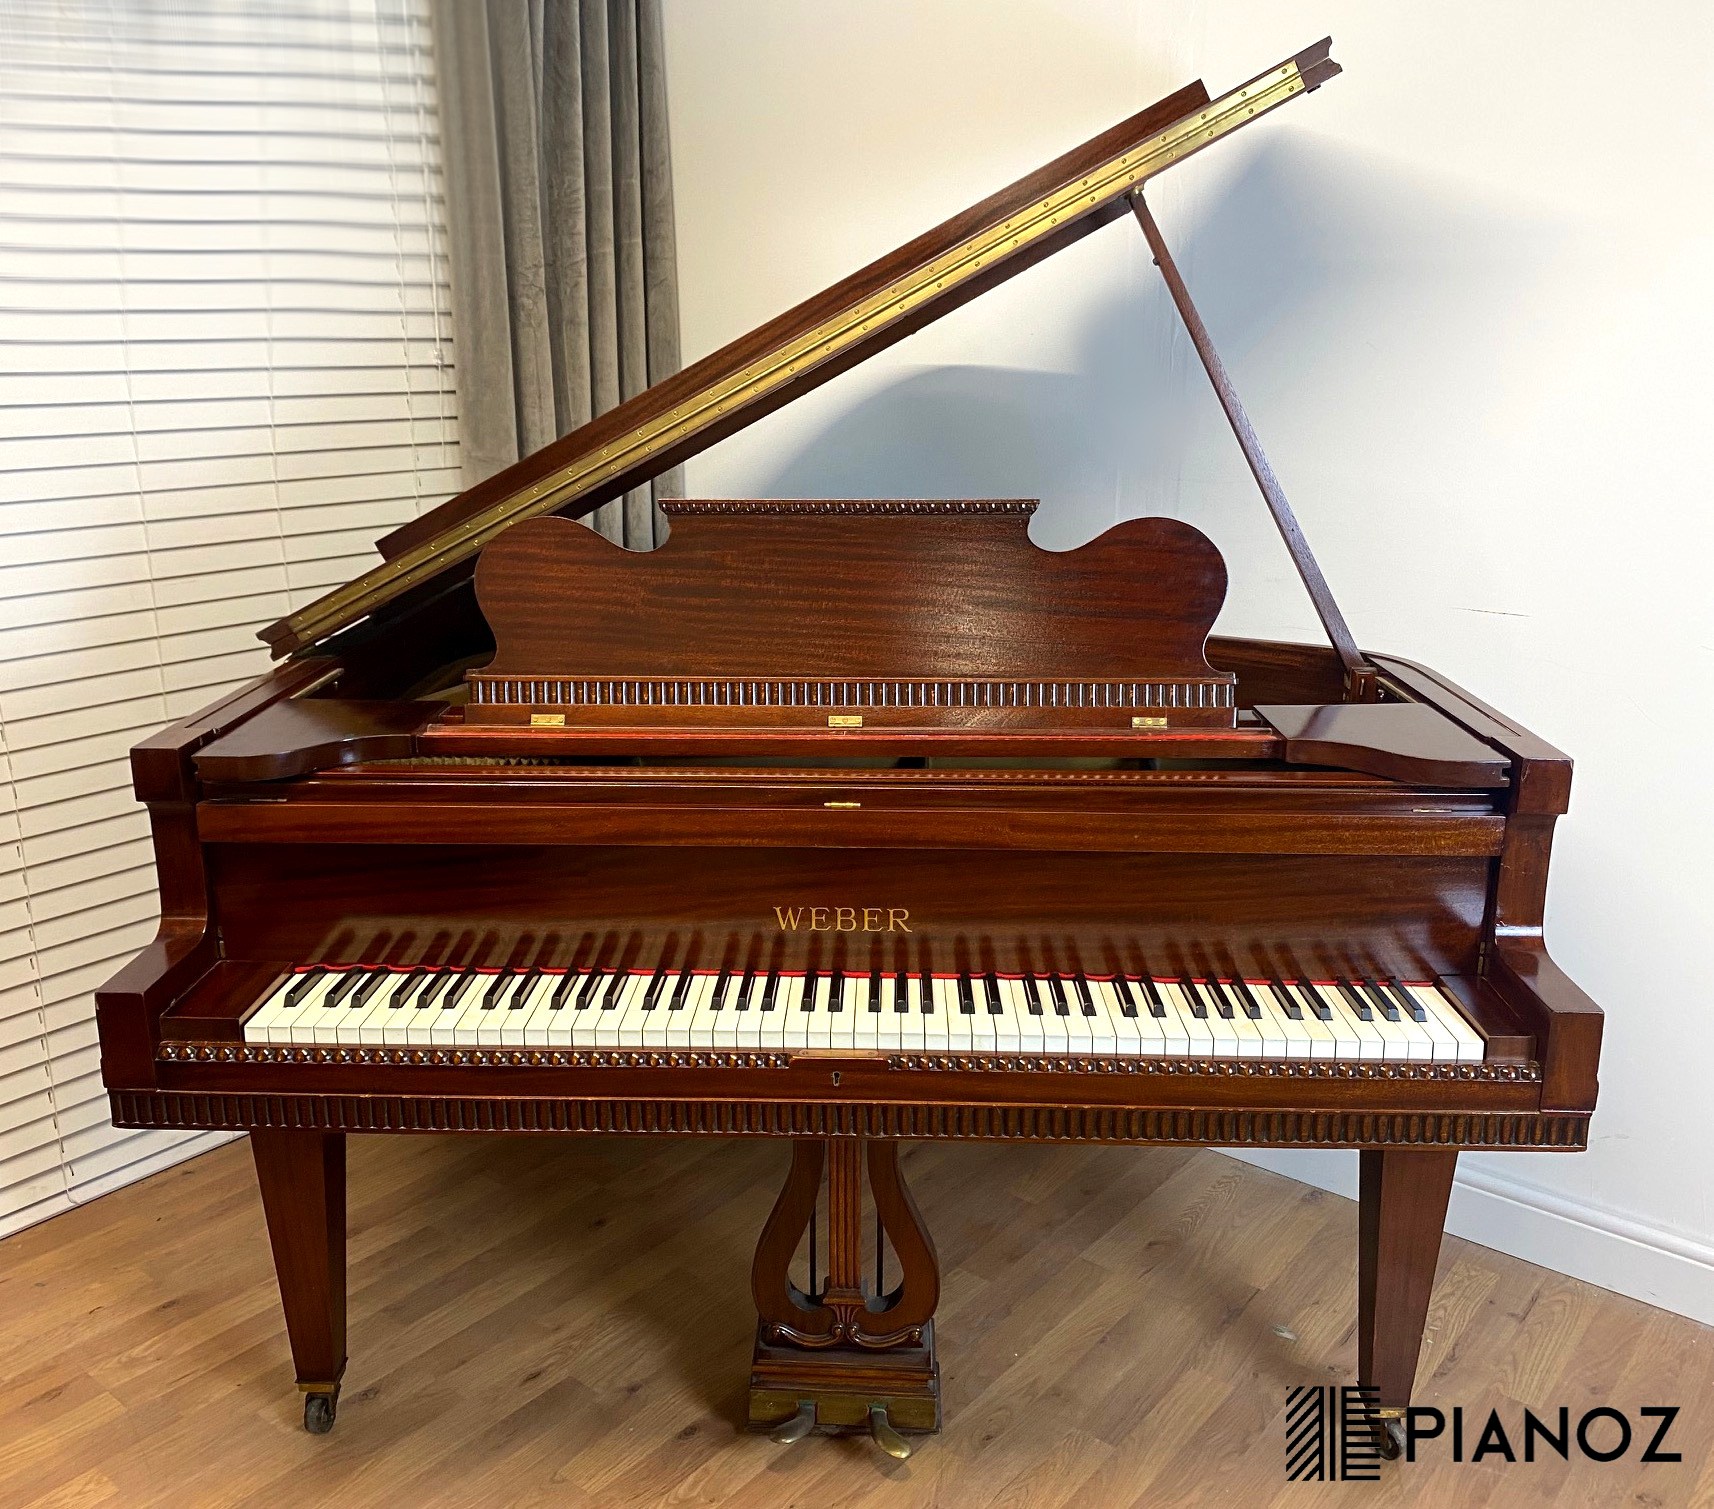 Weber Art Case Baby Grand Piano piano for sale in UK